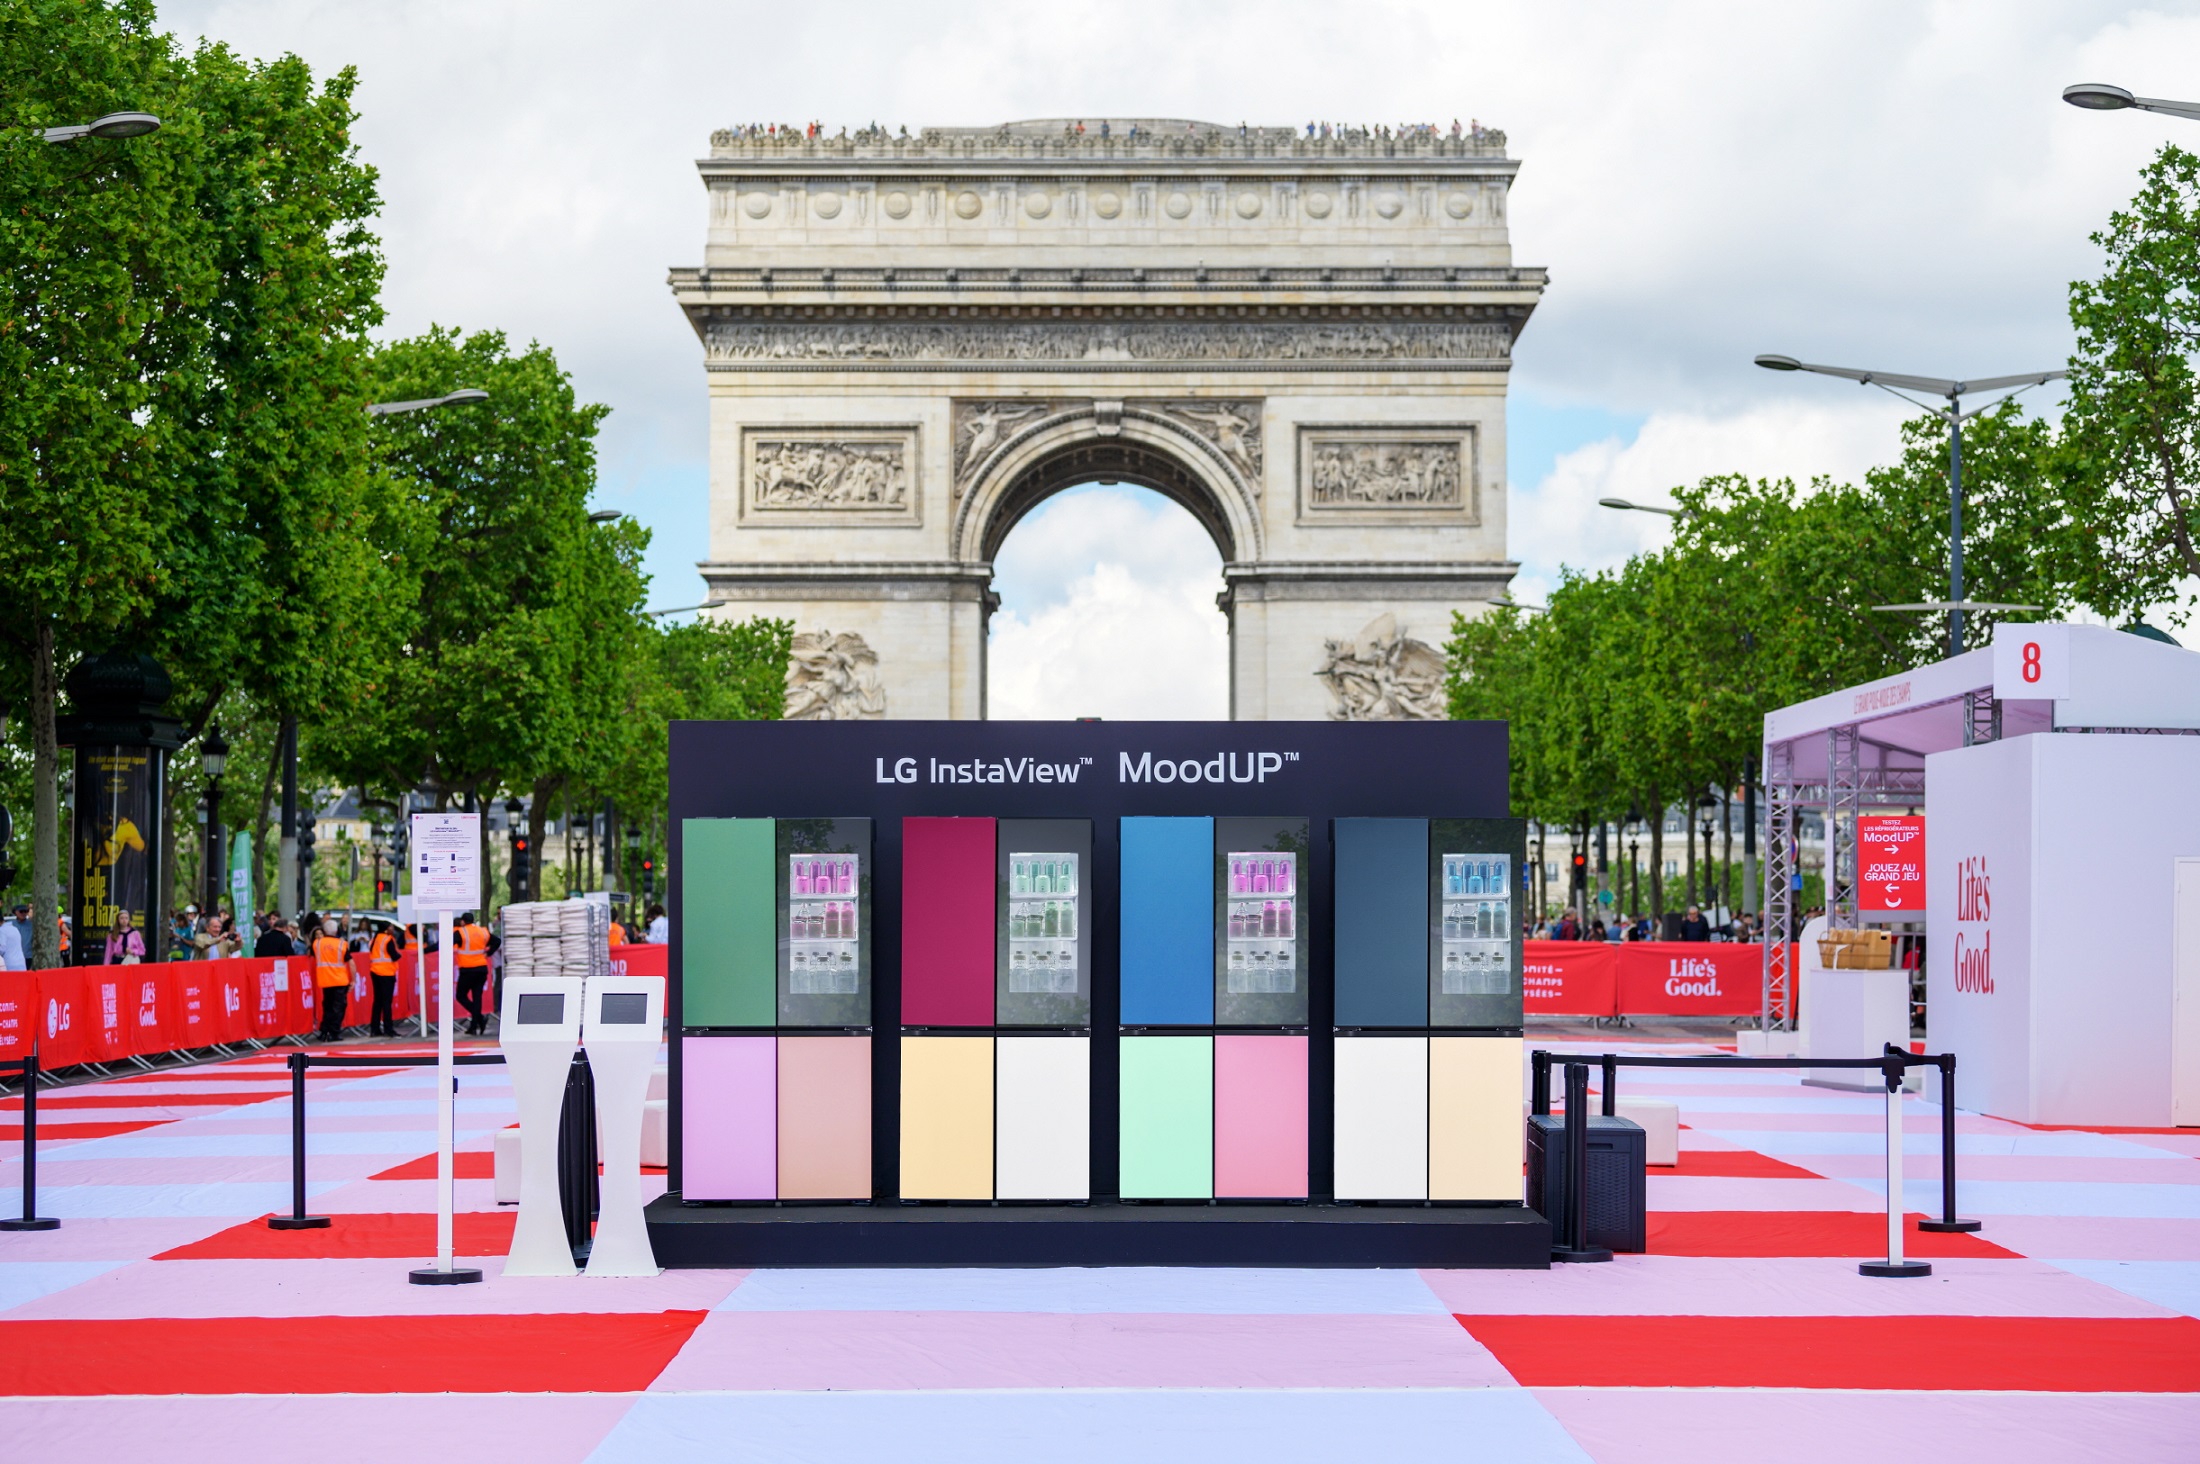 LG Electronics held an experience event on the 26th (local time) on the Champs-Elysees Street of the landmark in Paris to announce the launch of the "Mood Up Refrigerator" in France. More than 4,000 people visited the event.